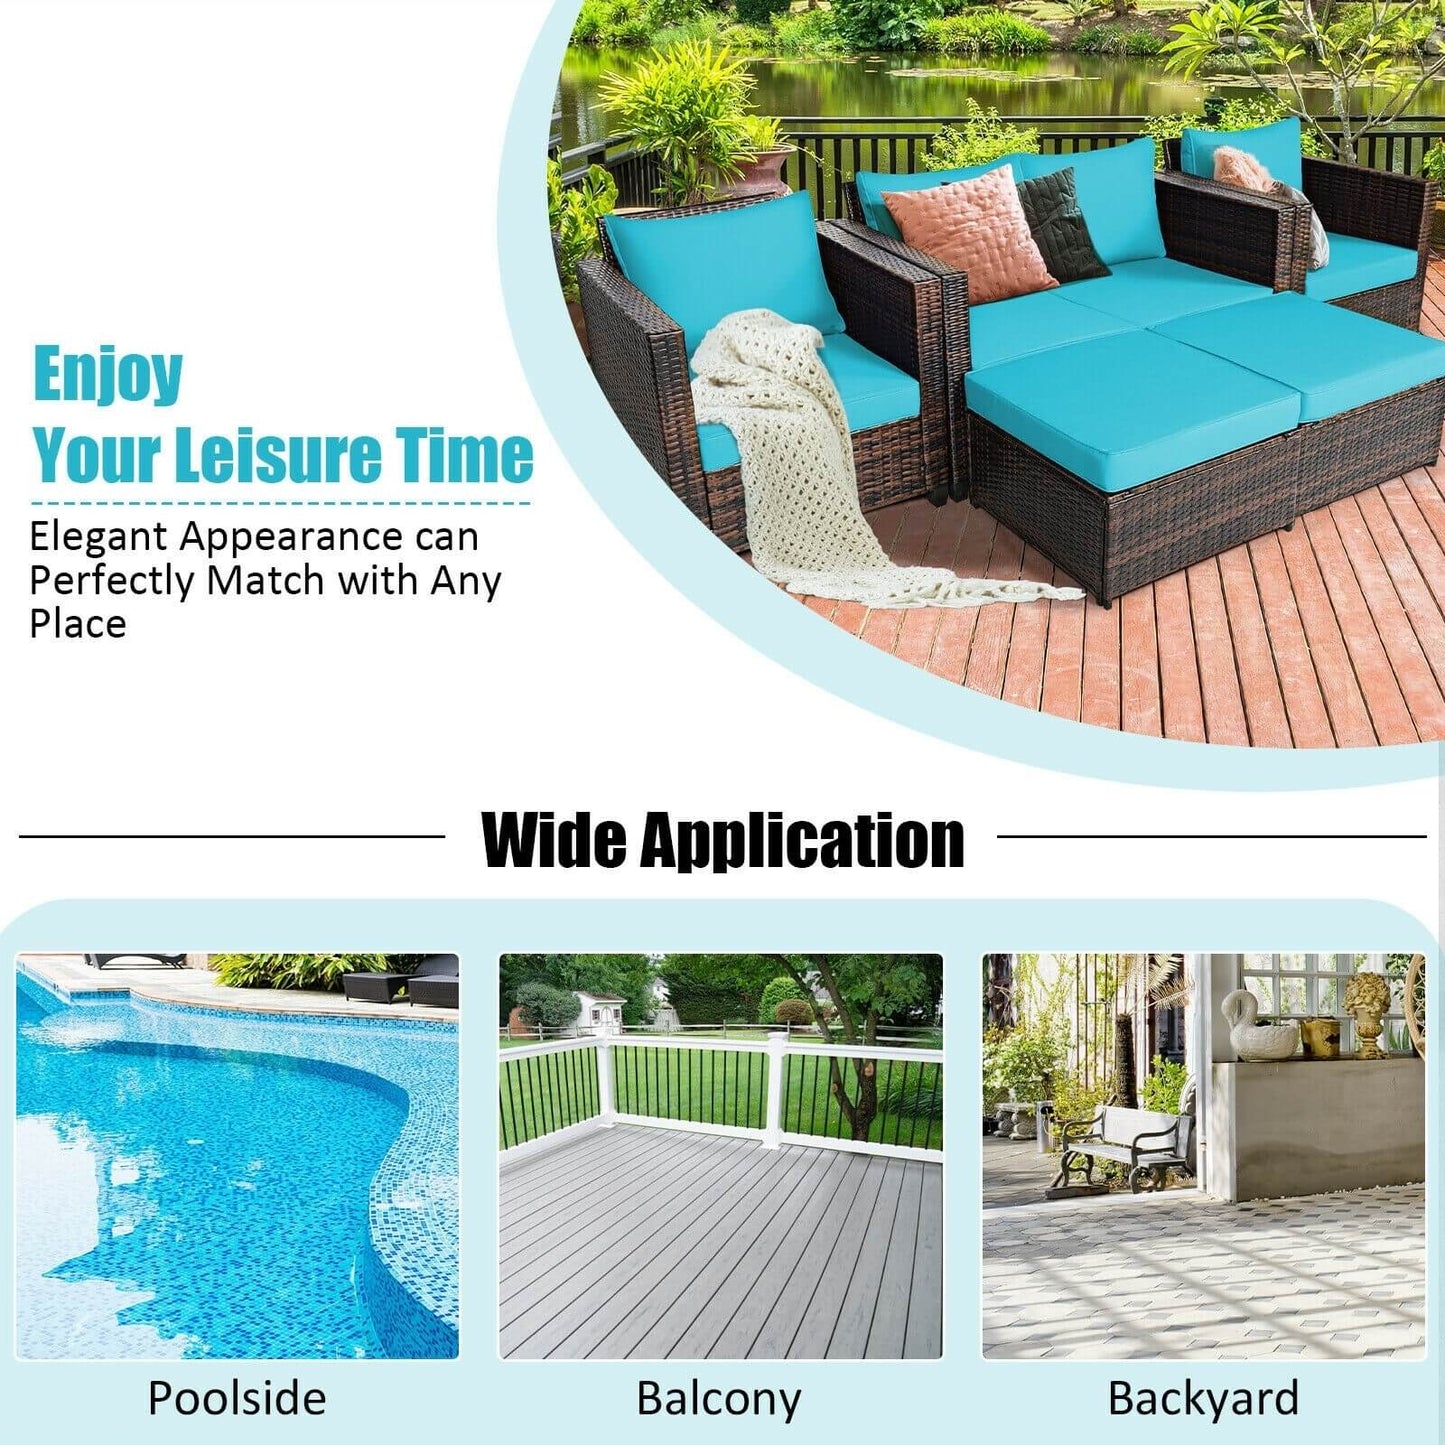 5 Pieces Patio Cushioned Rattan Furniture Set, Turquoise - Gallery Canada